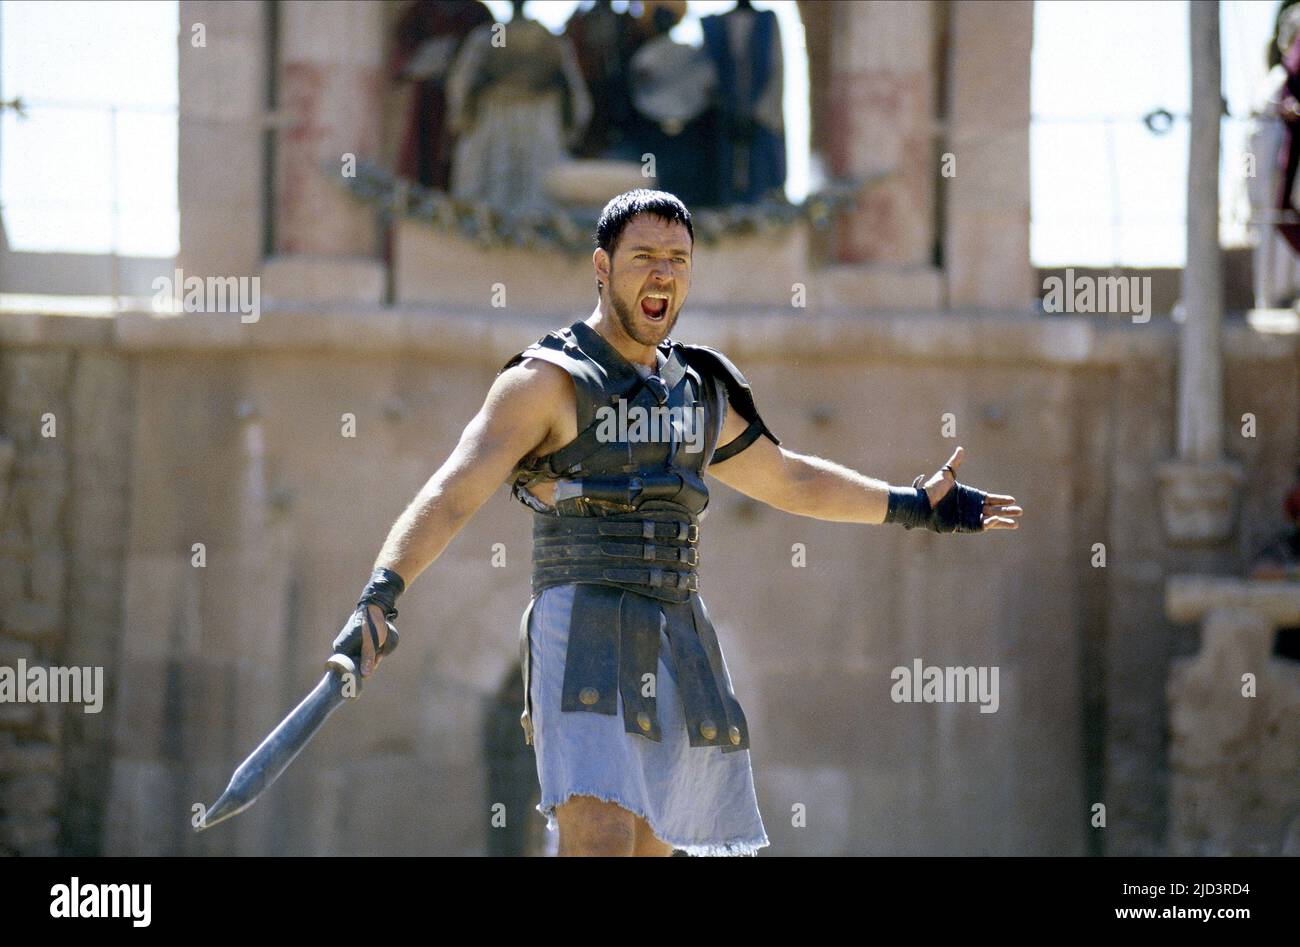 RUSSELL CROWE, GLADIATOR, 2000, Foto Stock